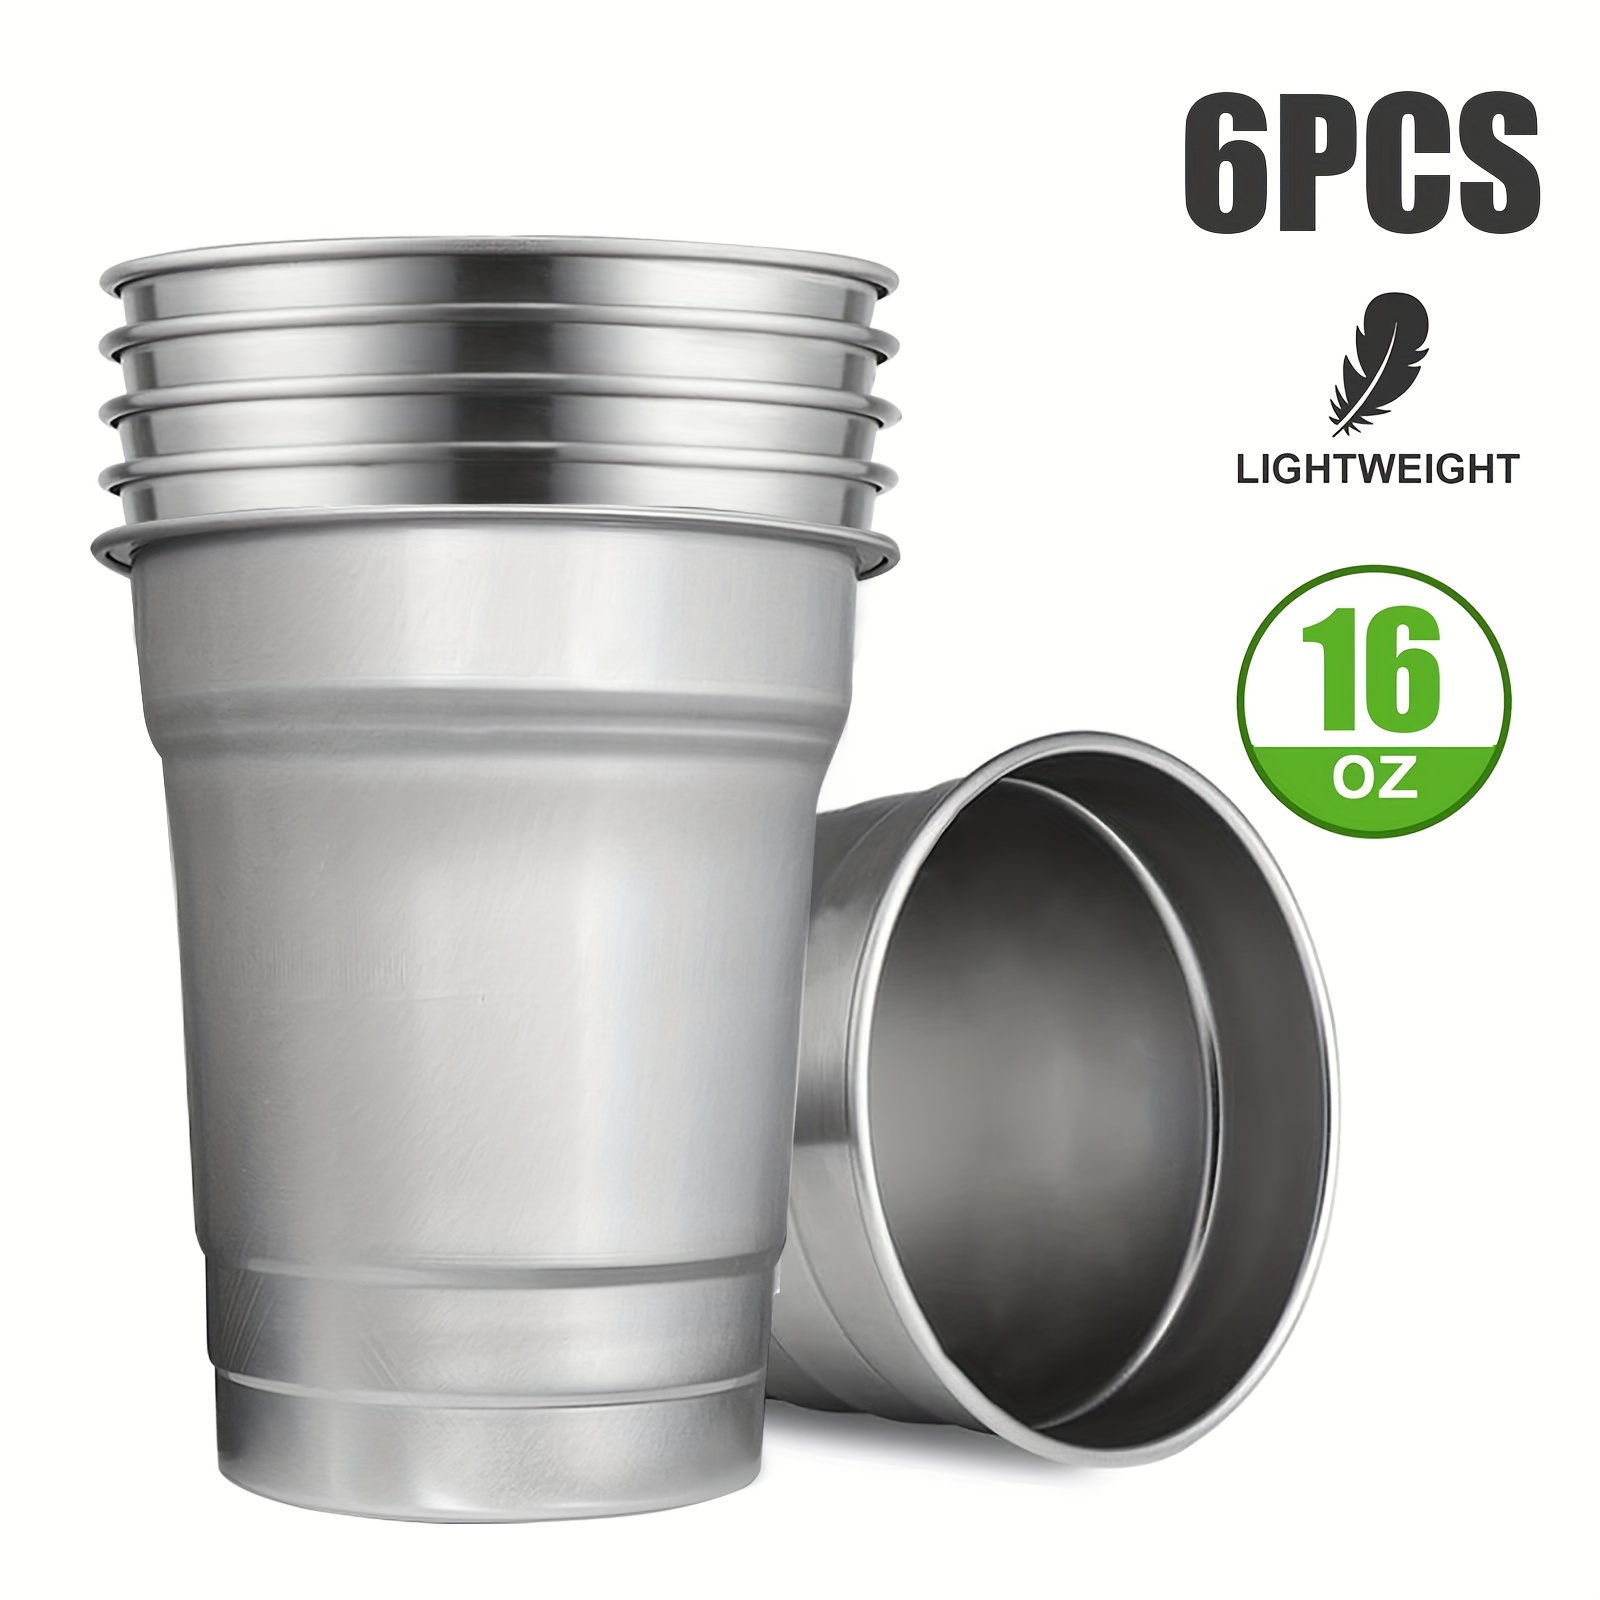 BALL Aluminum 12 Cups - 16 oz. Cold-Drink Cups with the BALL name & logo